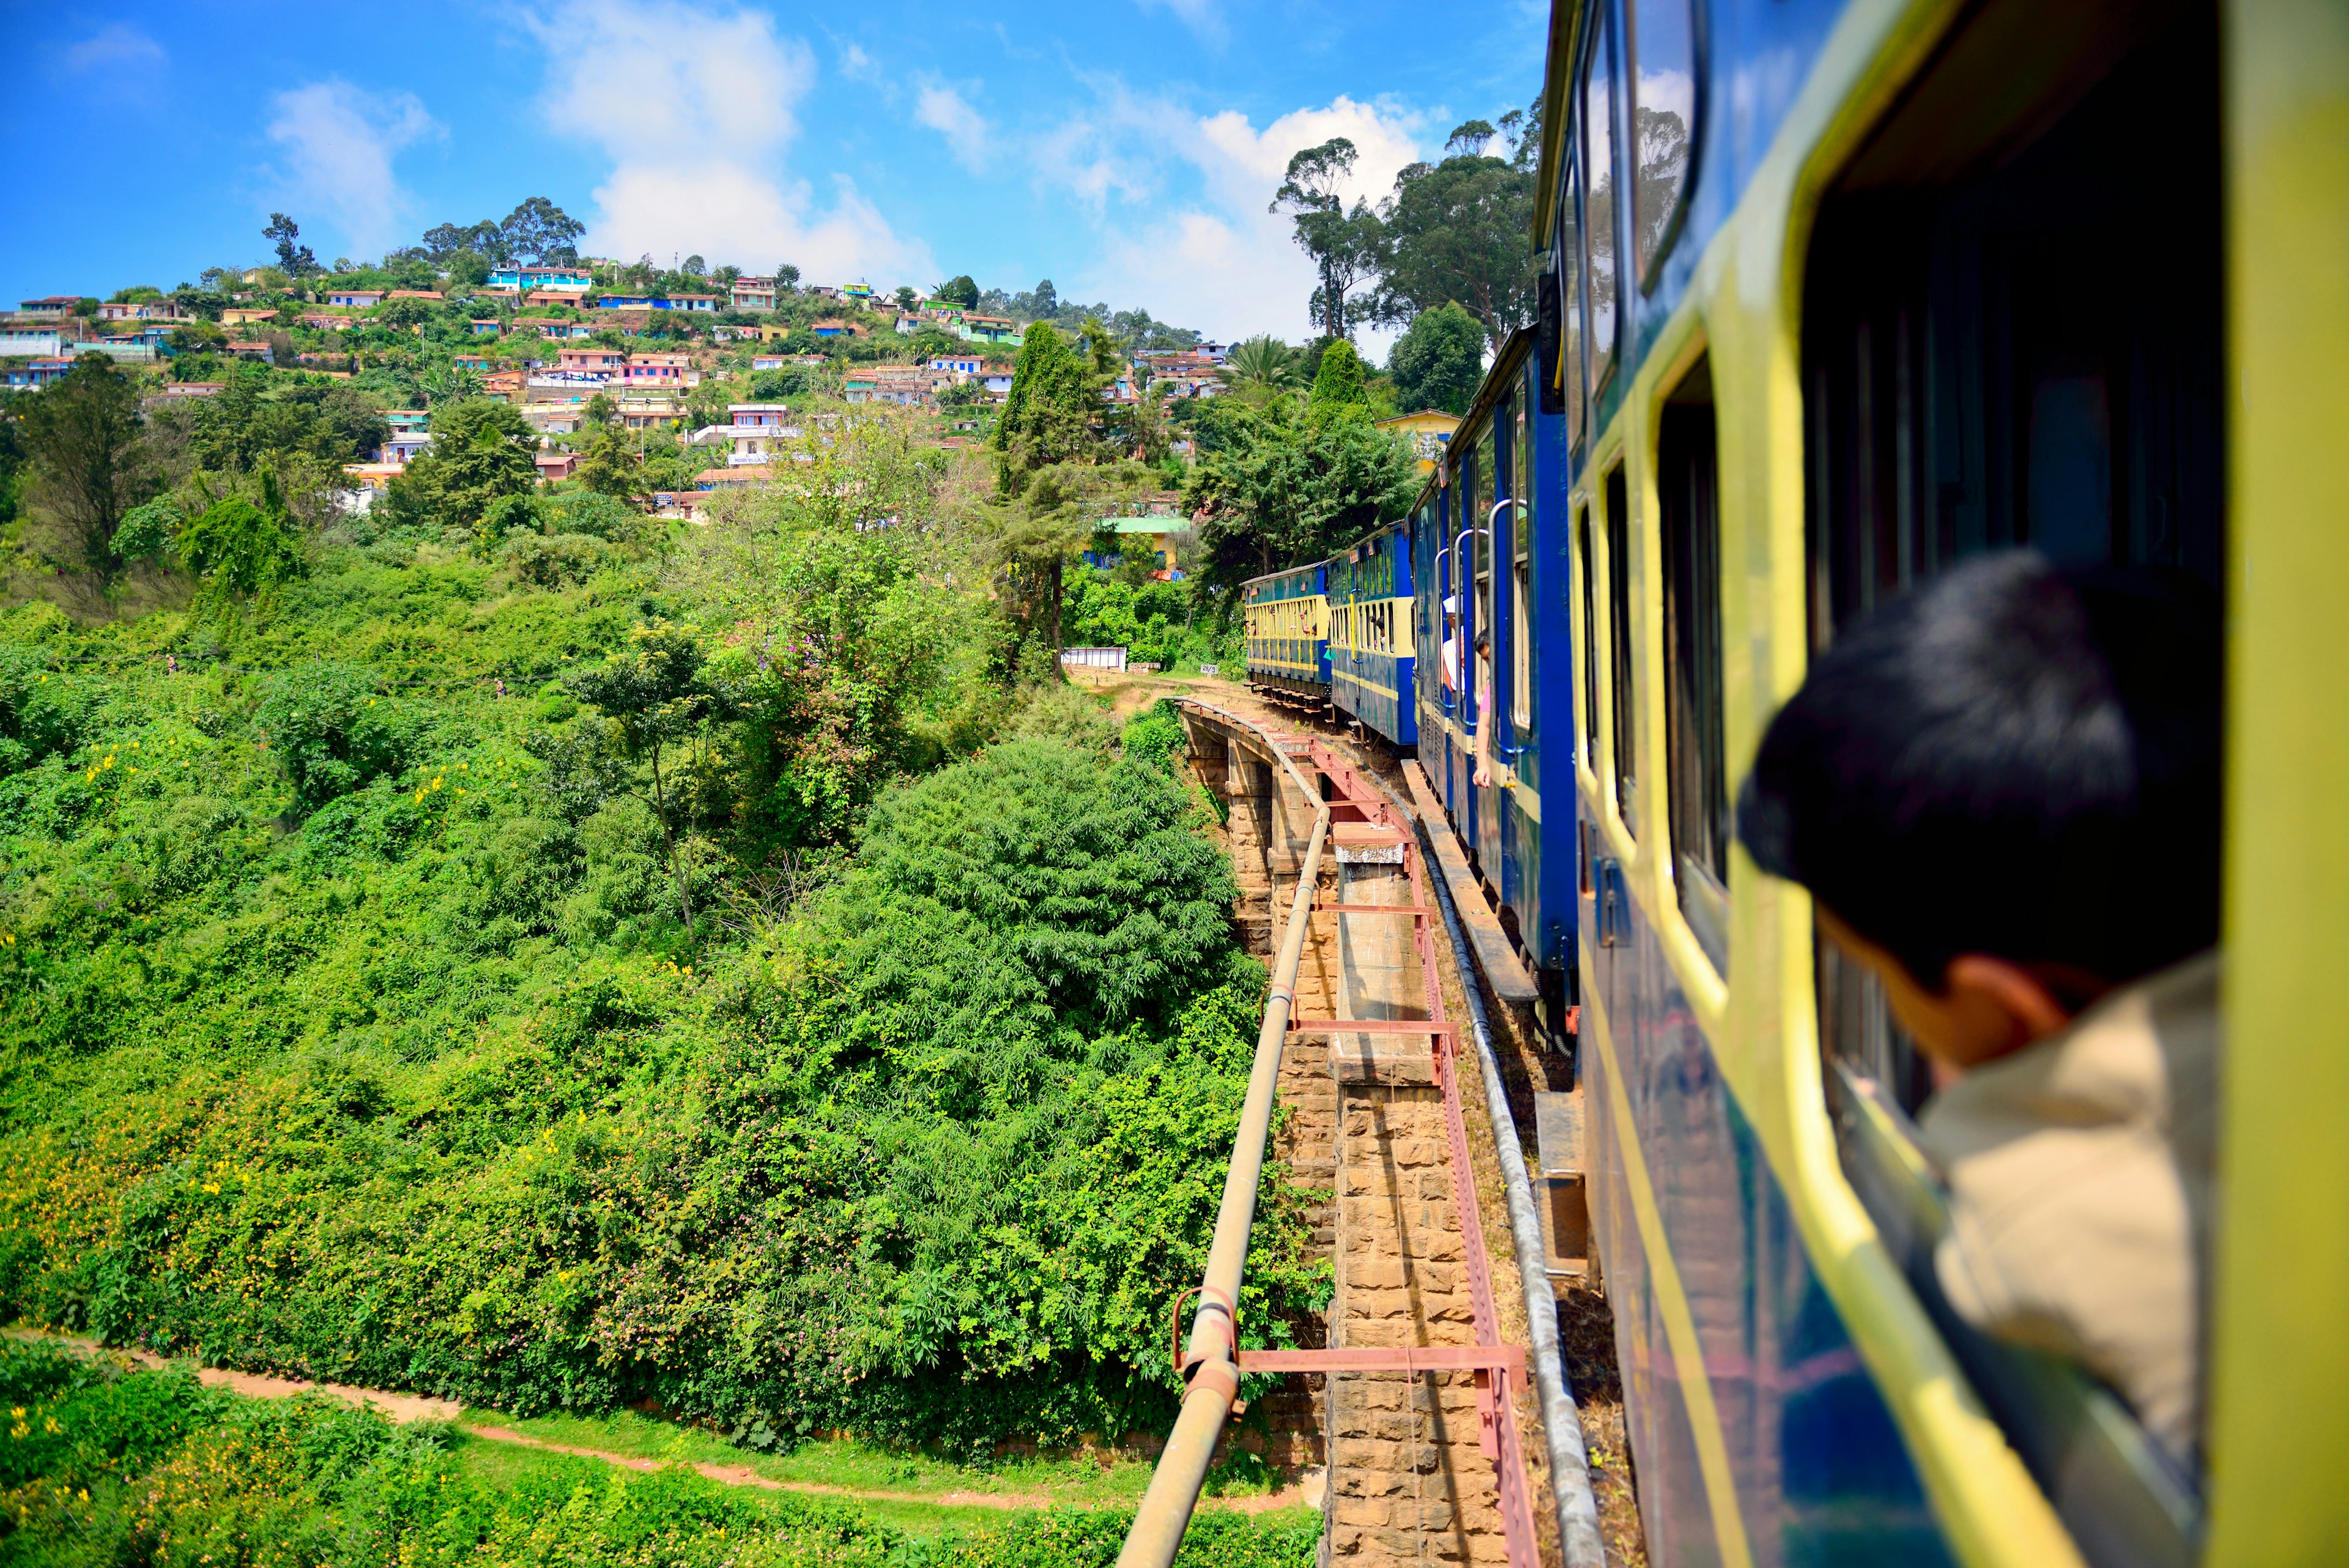 Ooty or Ootacamund (Udagamandalam) train or Nilgiris Mountain Railway that travels on the hill slope is a UNESCO world heritage site. Ooty is a famous hill station in Tamil Nadu, India.